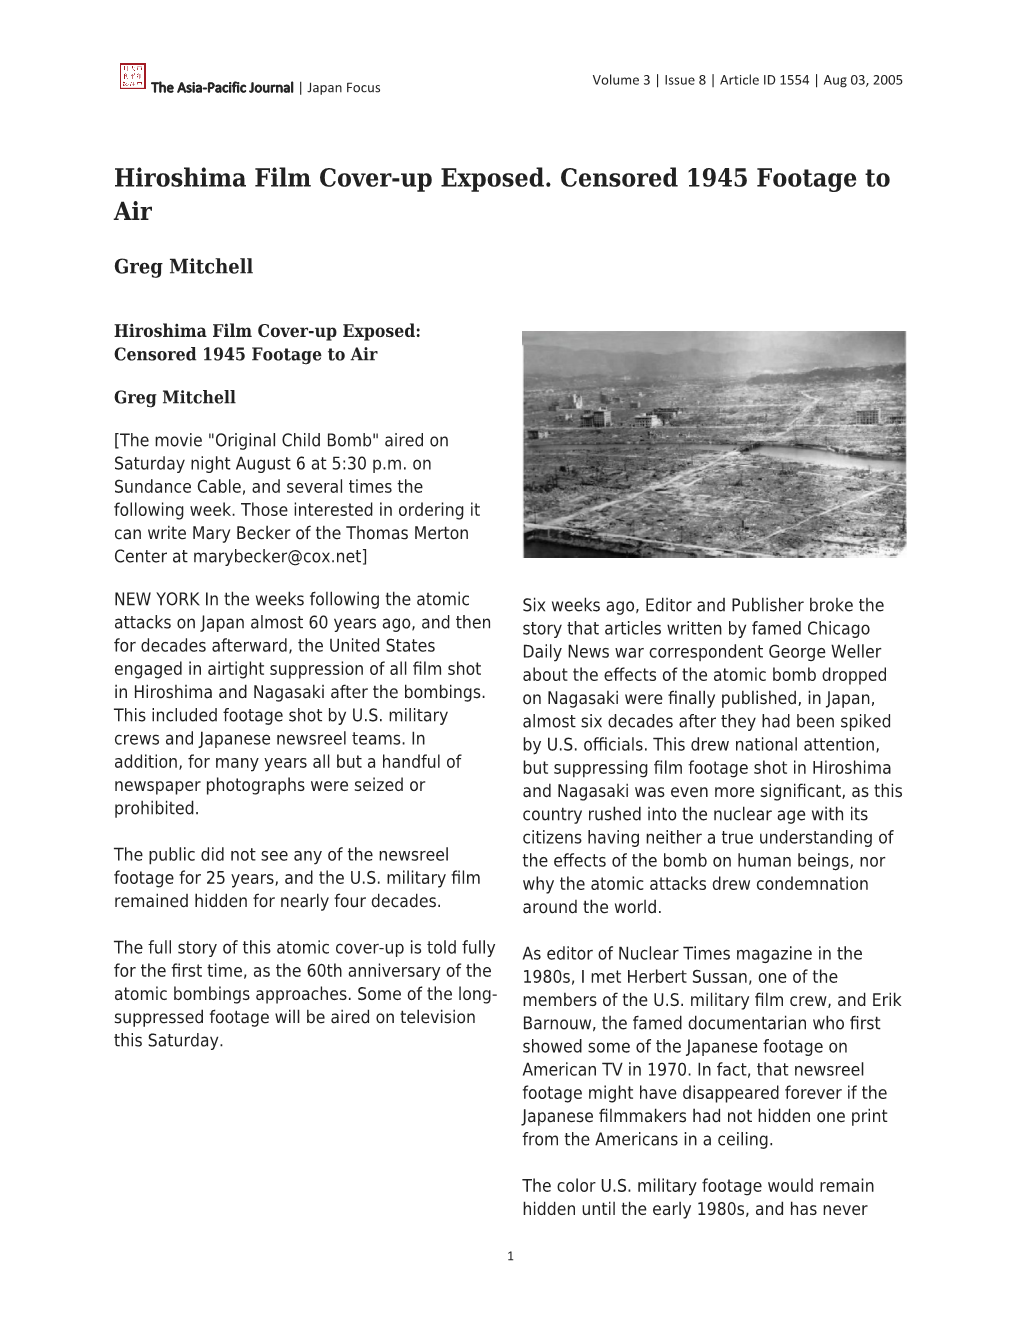 Hiroshima Film Cover-Up Exposed. Censored 1945 Footage to Air